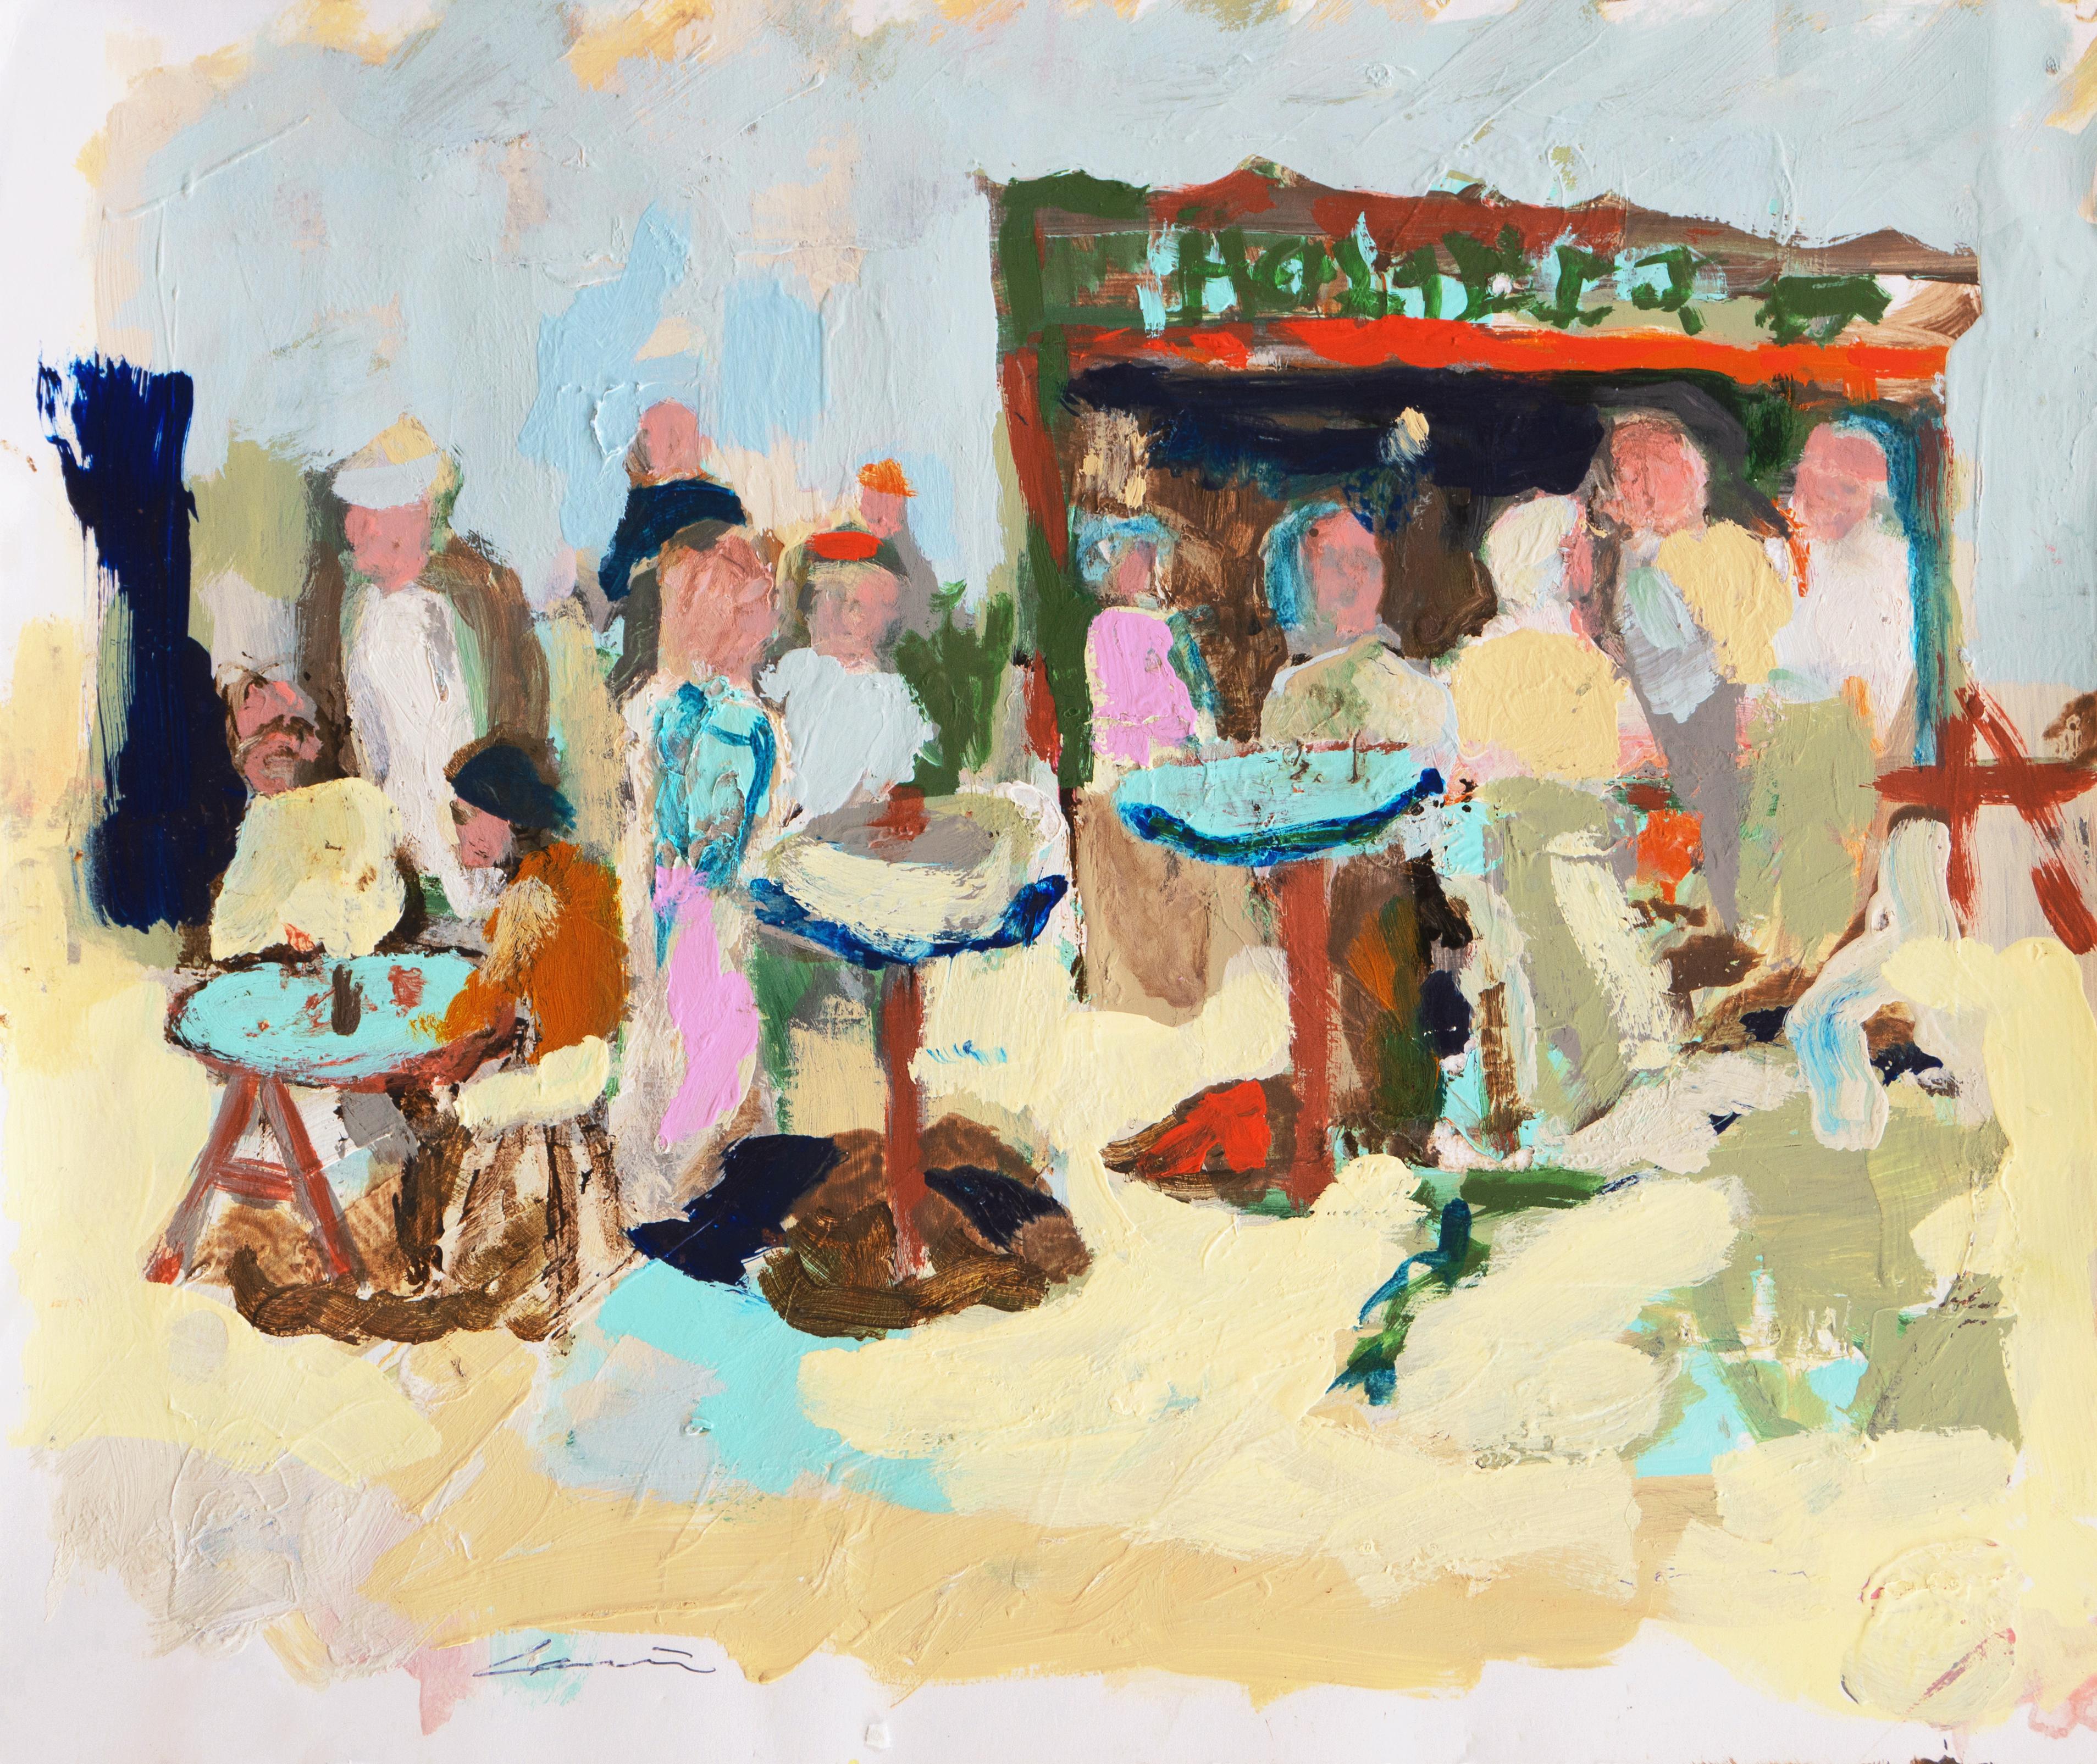 Robert Canete Landscape Painting - 'Fish Market, Cannery Row, Monterey', California Expressionist, Stanford, Carmel